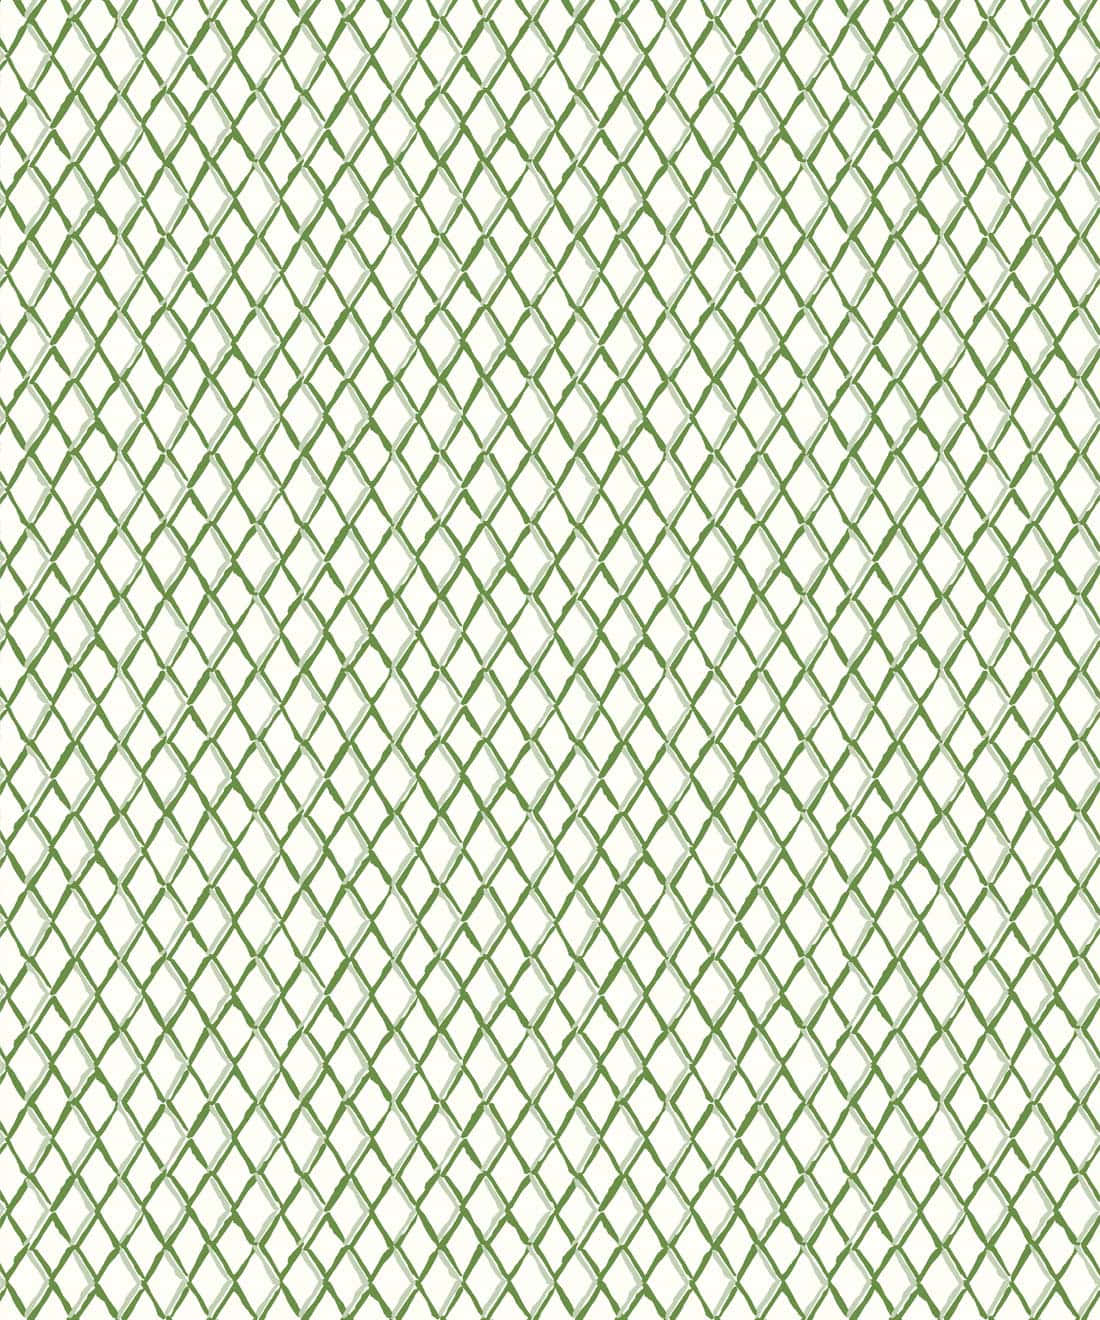 Abstract Green Wire Mesh Artwork Background